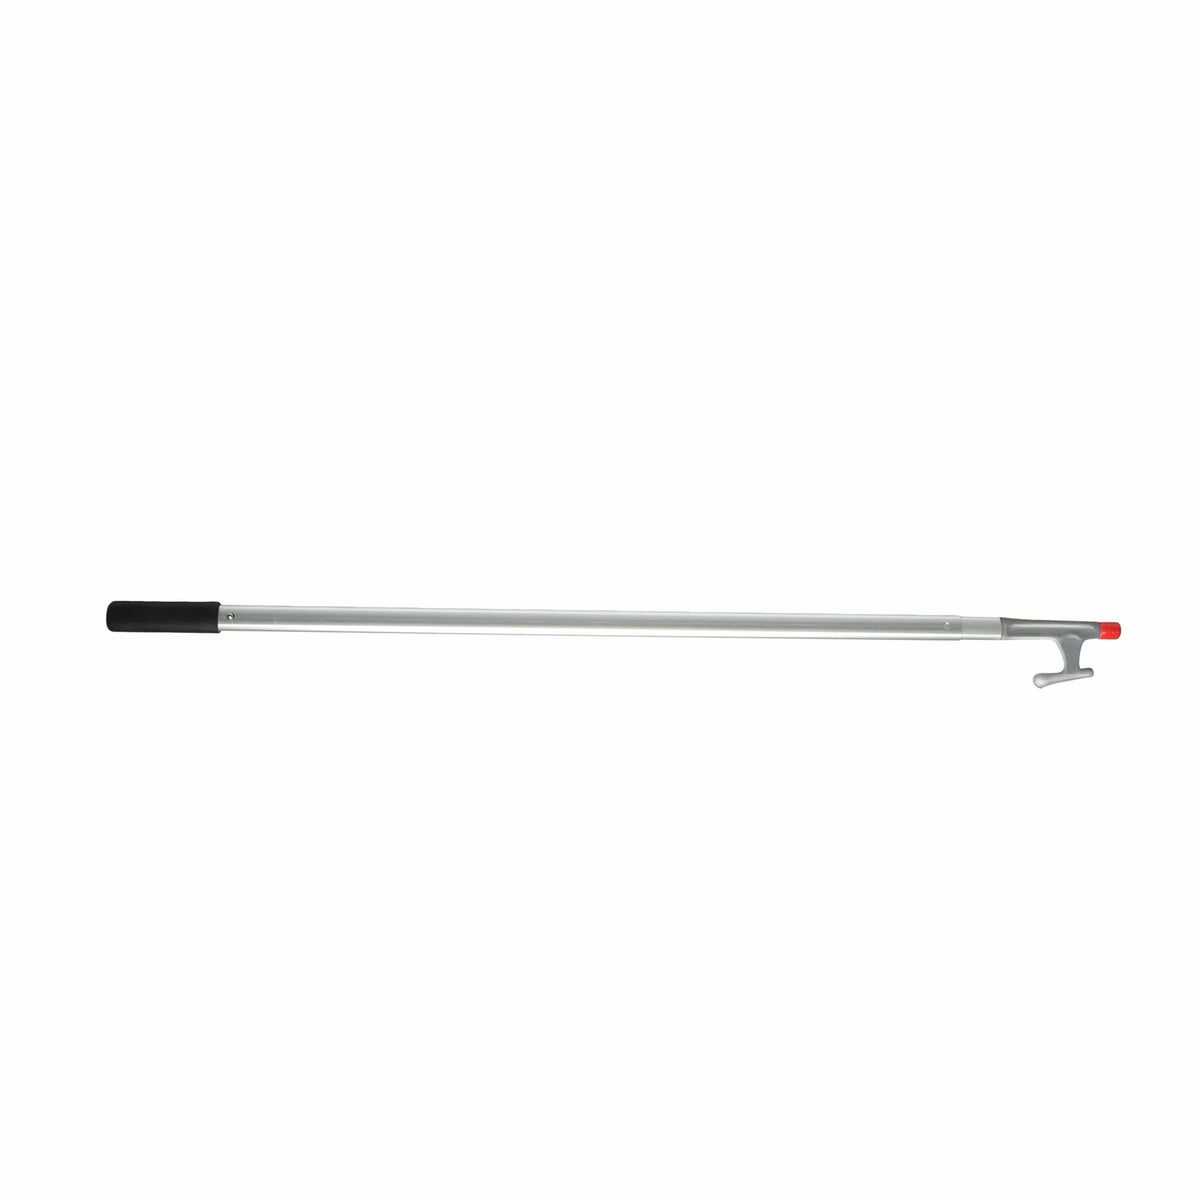 Garelick Boat Hook with Stainless Head 6' #55206